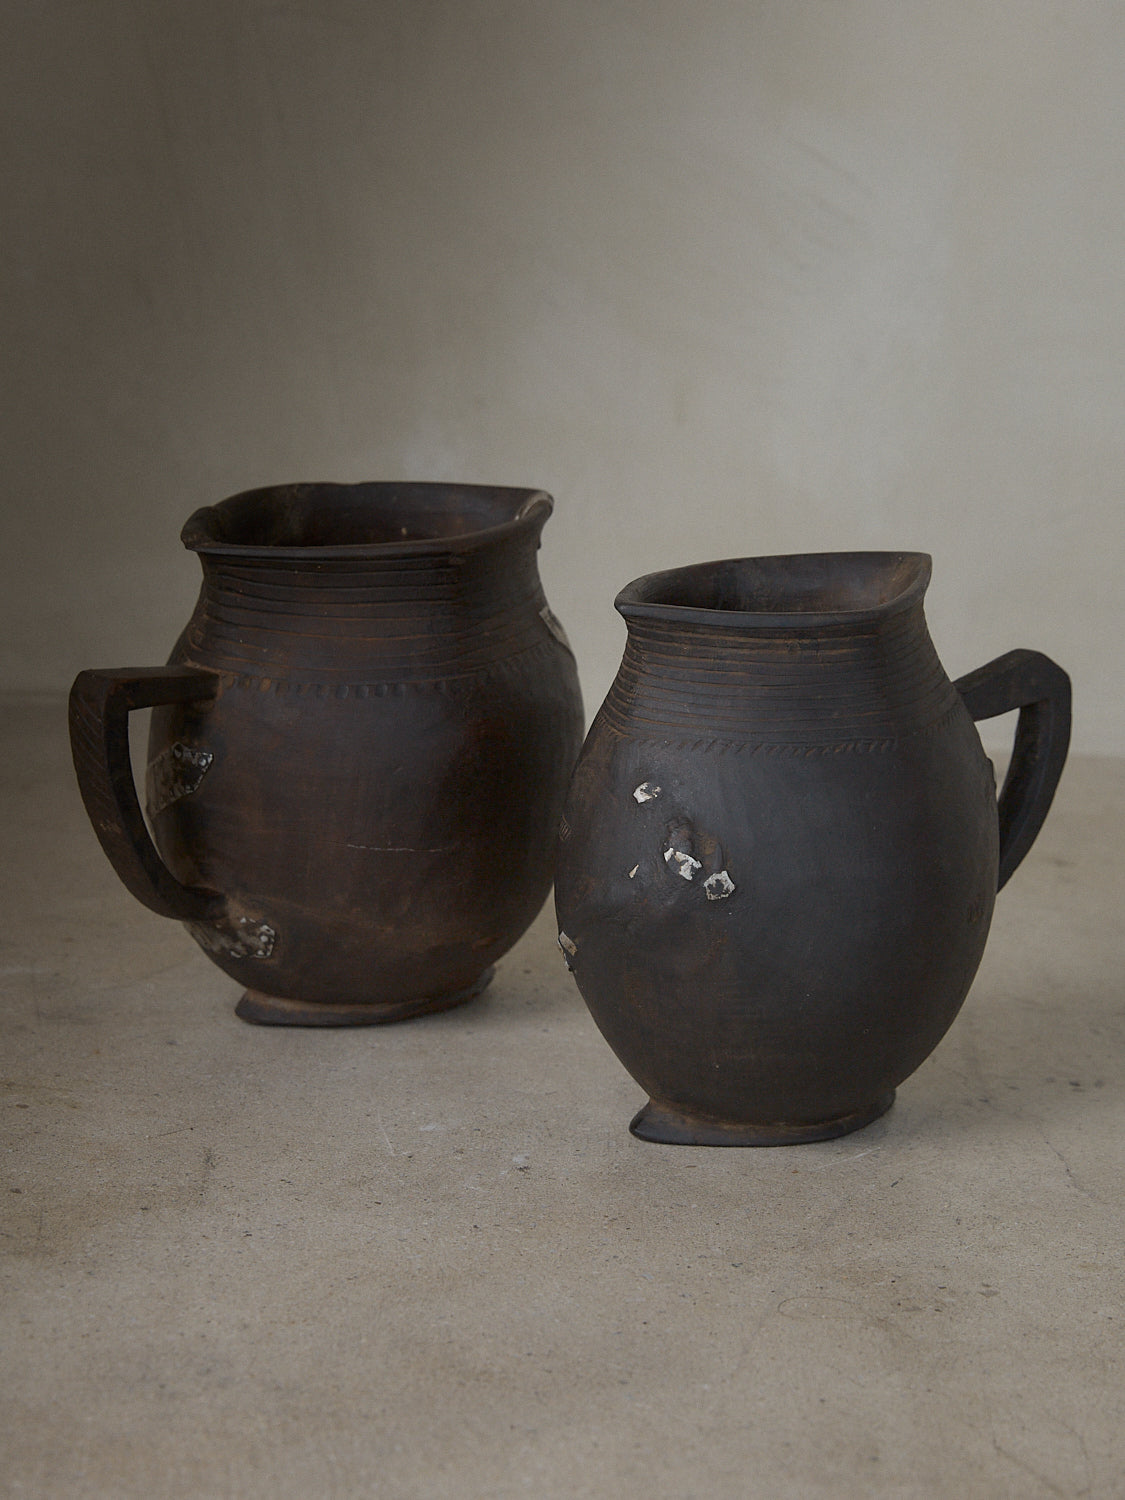 Small, hand carved milk pitcher with artful etching and hand-forged metal repair details in dark natural wood. 